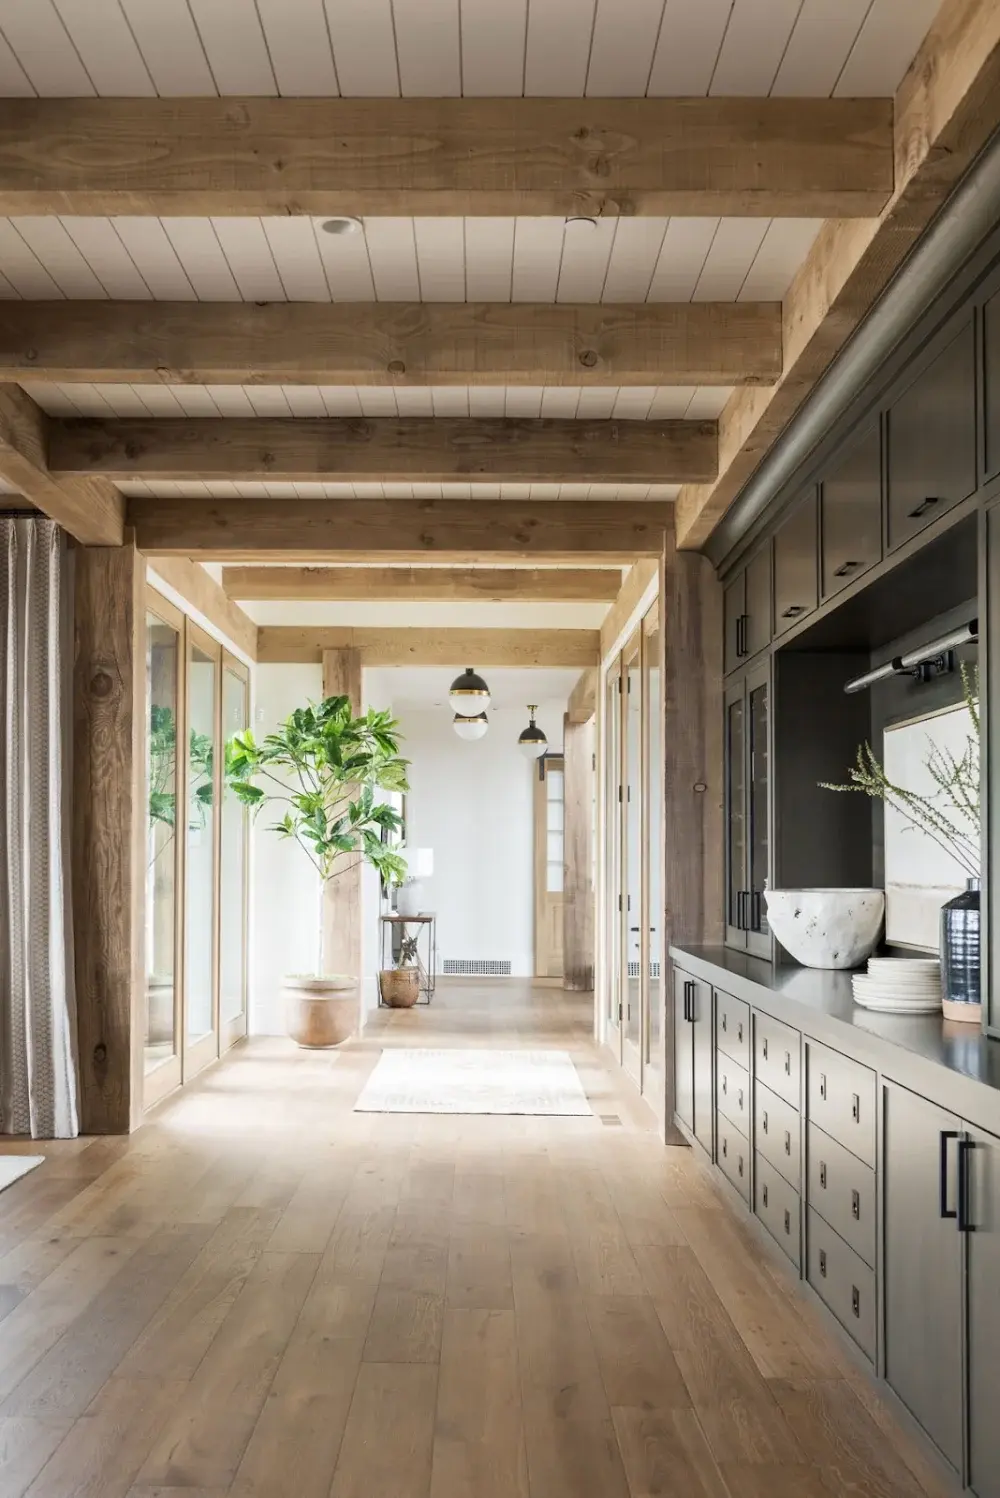 For Blog Only - Studio McGee - Kitchen with Thick Wooden Beams